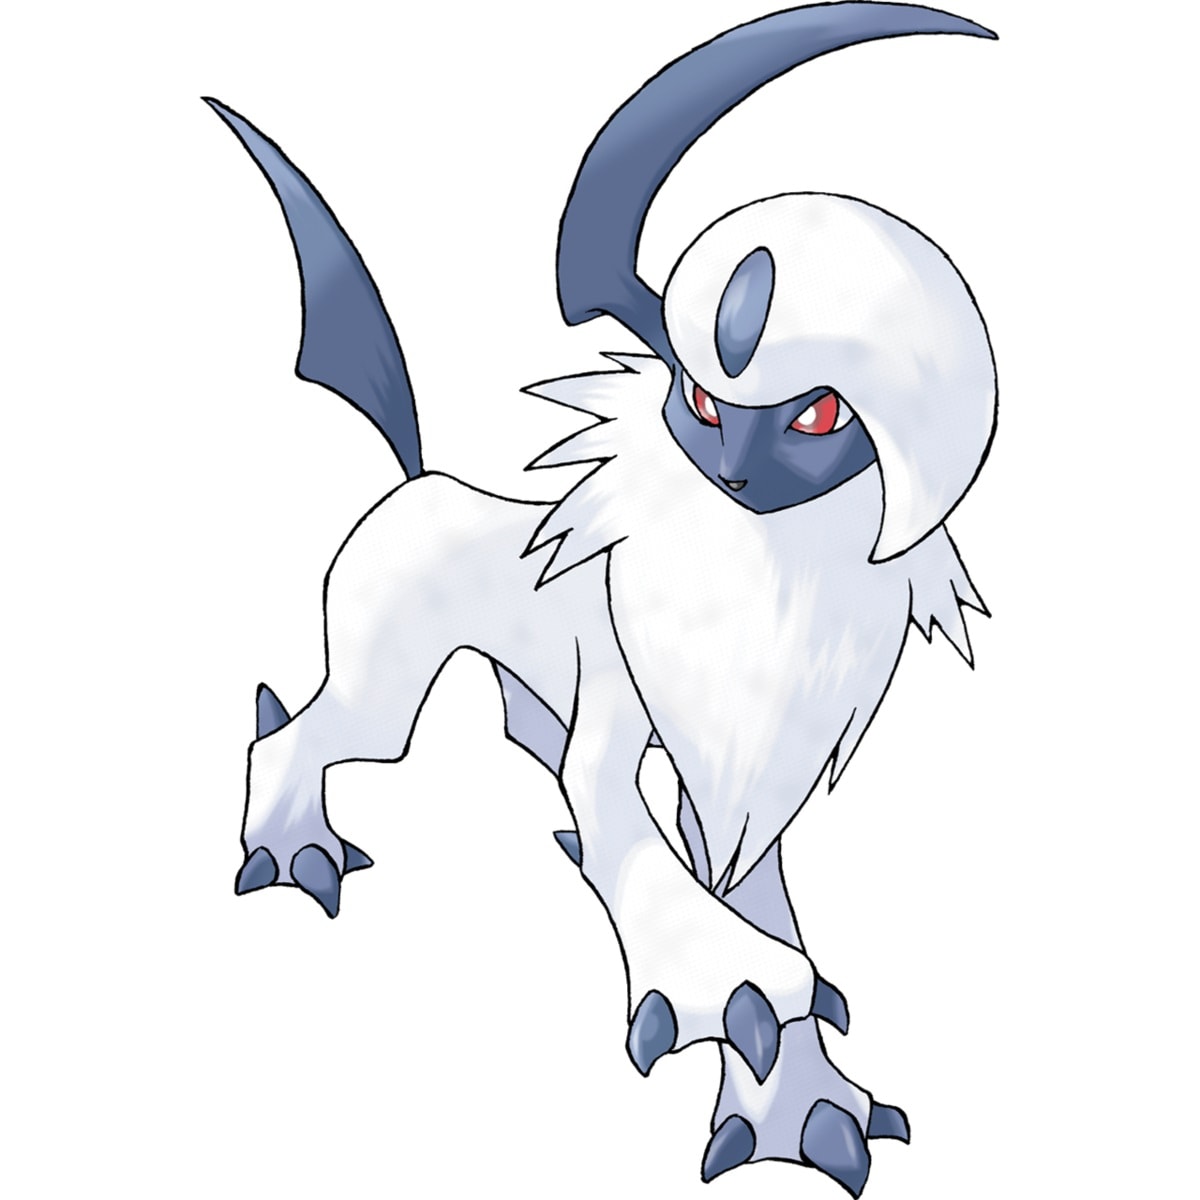 Absol, one of the first Team Sierra Pokémon that you will meet